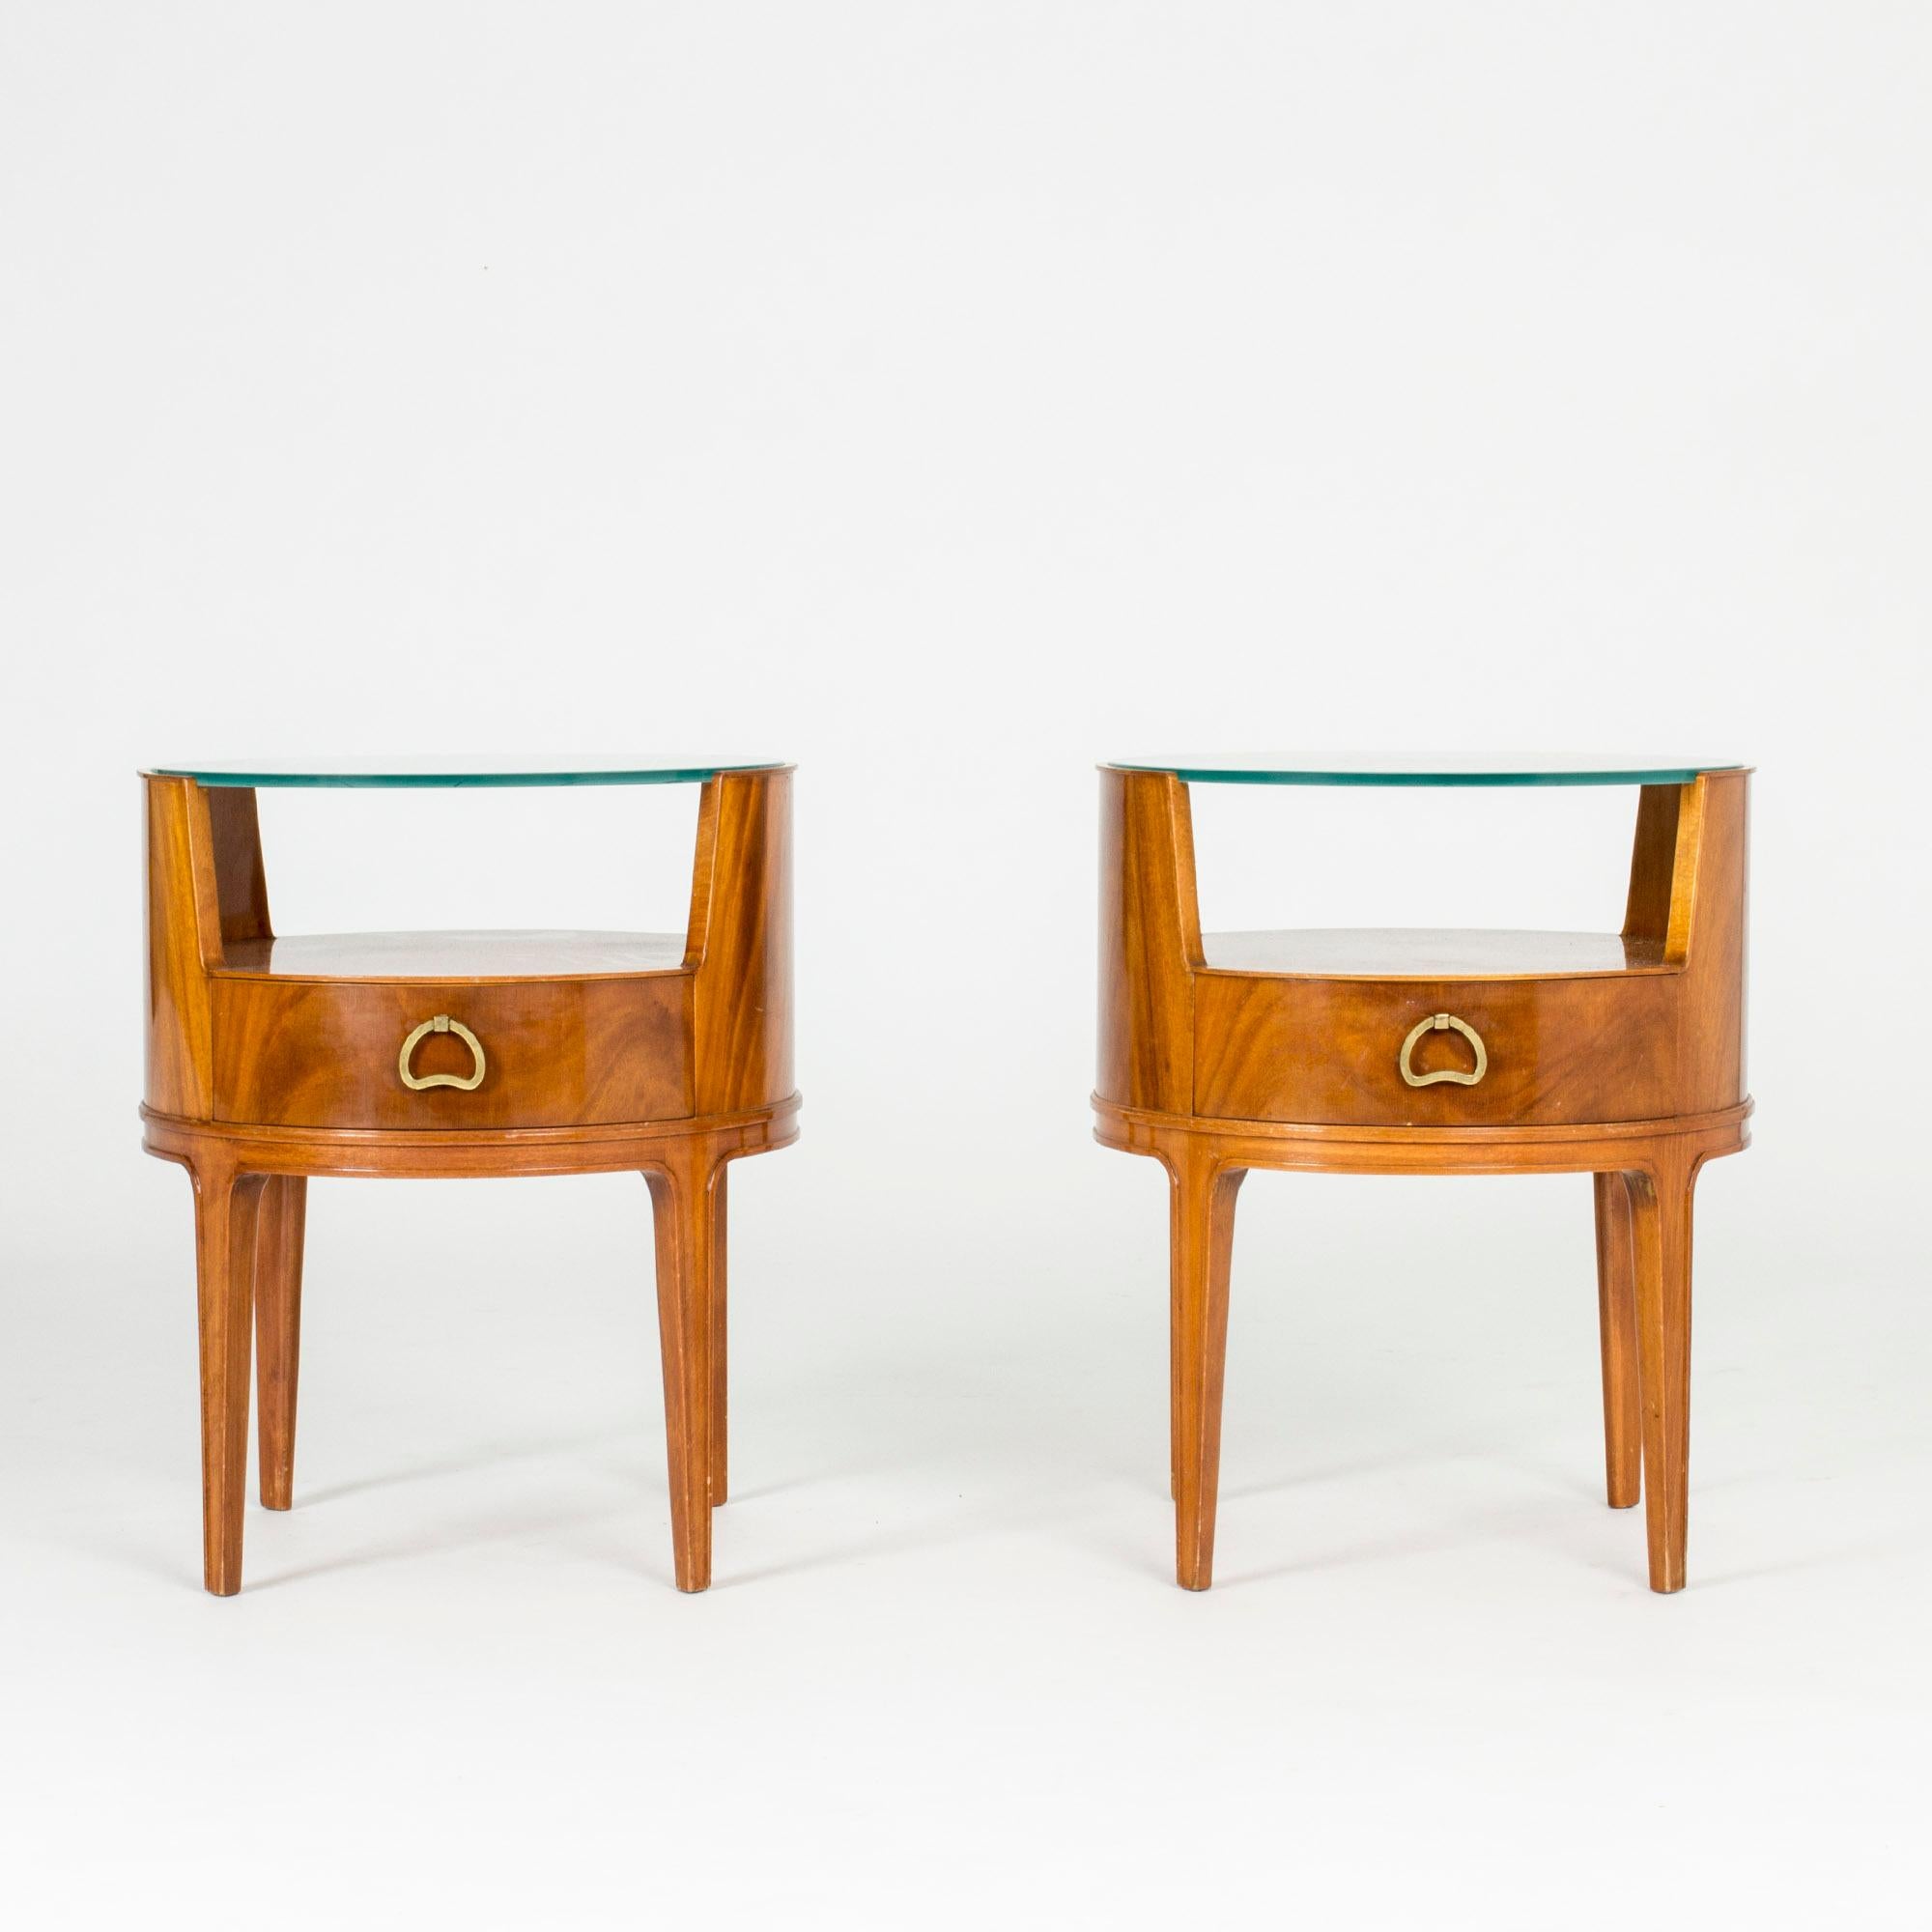 Pair of beautiful bedside tables by Axel Larsson, with pyramid mahogany veneer, green tinted glass tops and sculpted brass handles. The glass tops have an etched checkered pattern.